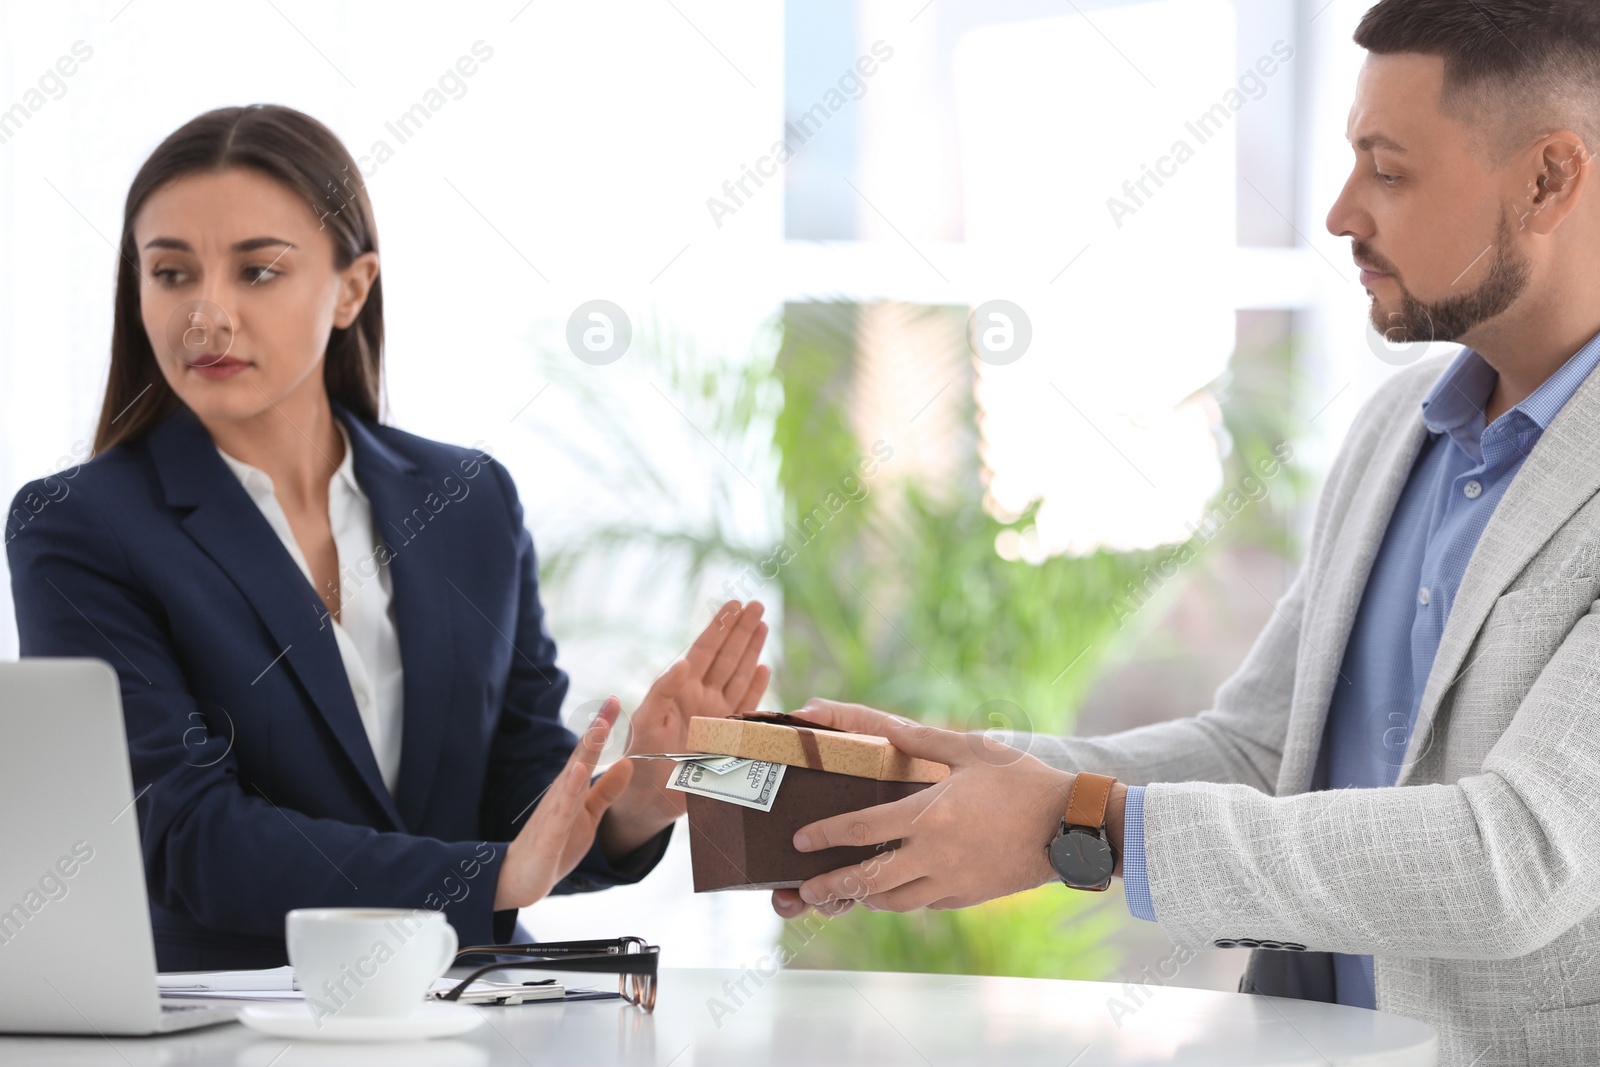 Photo of Businesswoman refusing to take bribe at table indoors